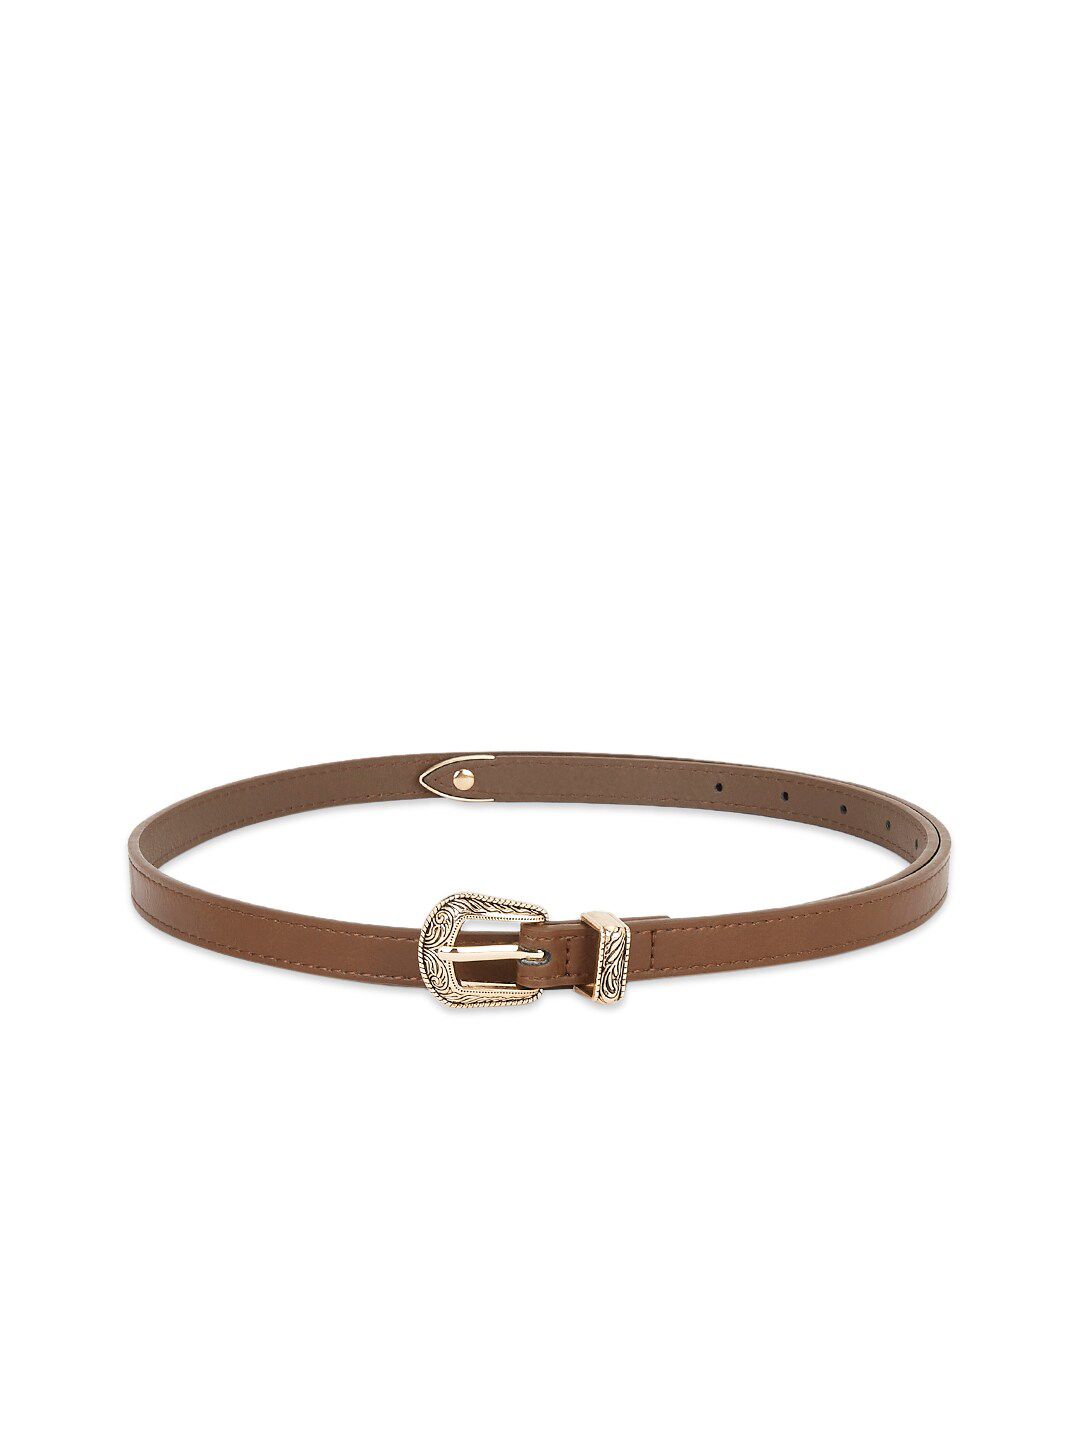 Forever Glam by Pantaloons Women Brown PU Belt Price in India